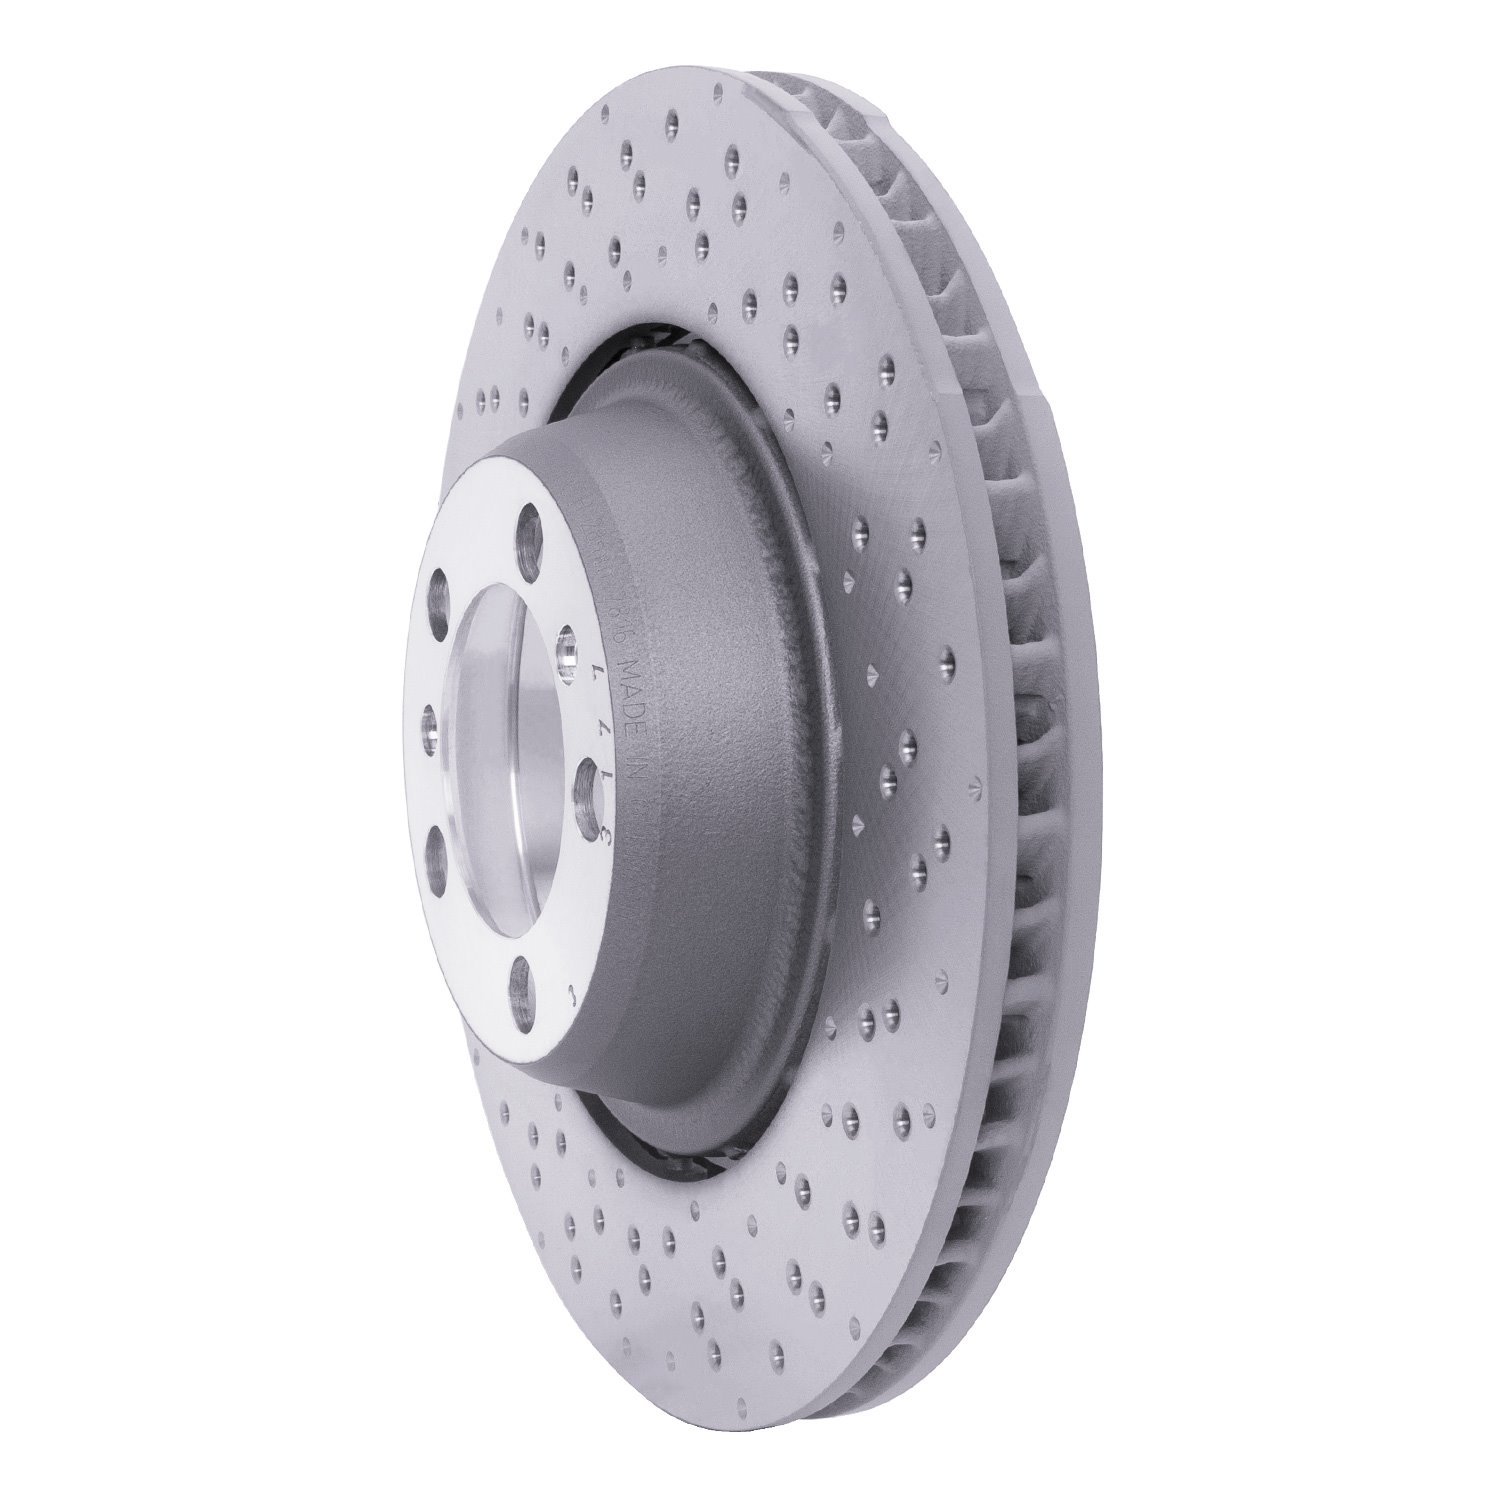 Hi-Carbon Alloy Geomet-Coated Drilled Rotor, 2013-2019